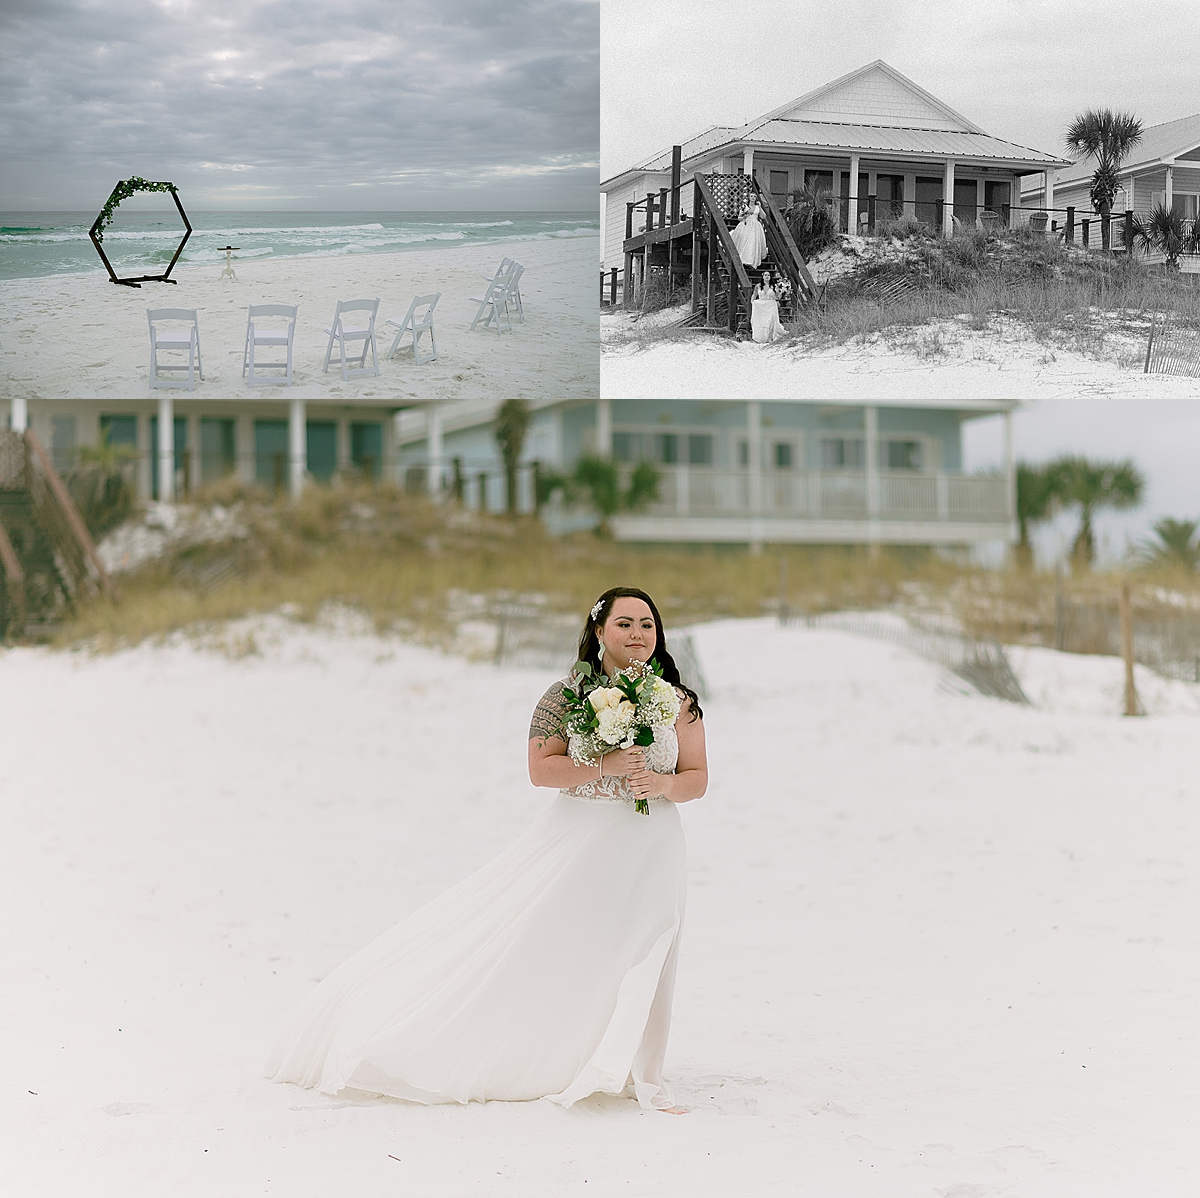 beach house and arch for elopement by Emily burns photo